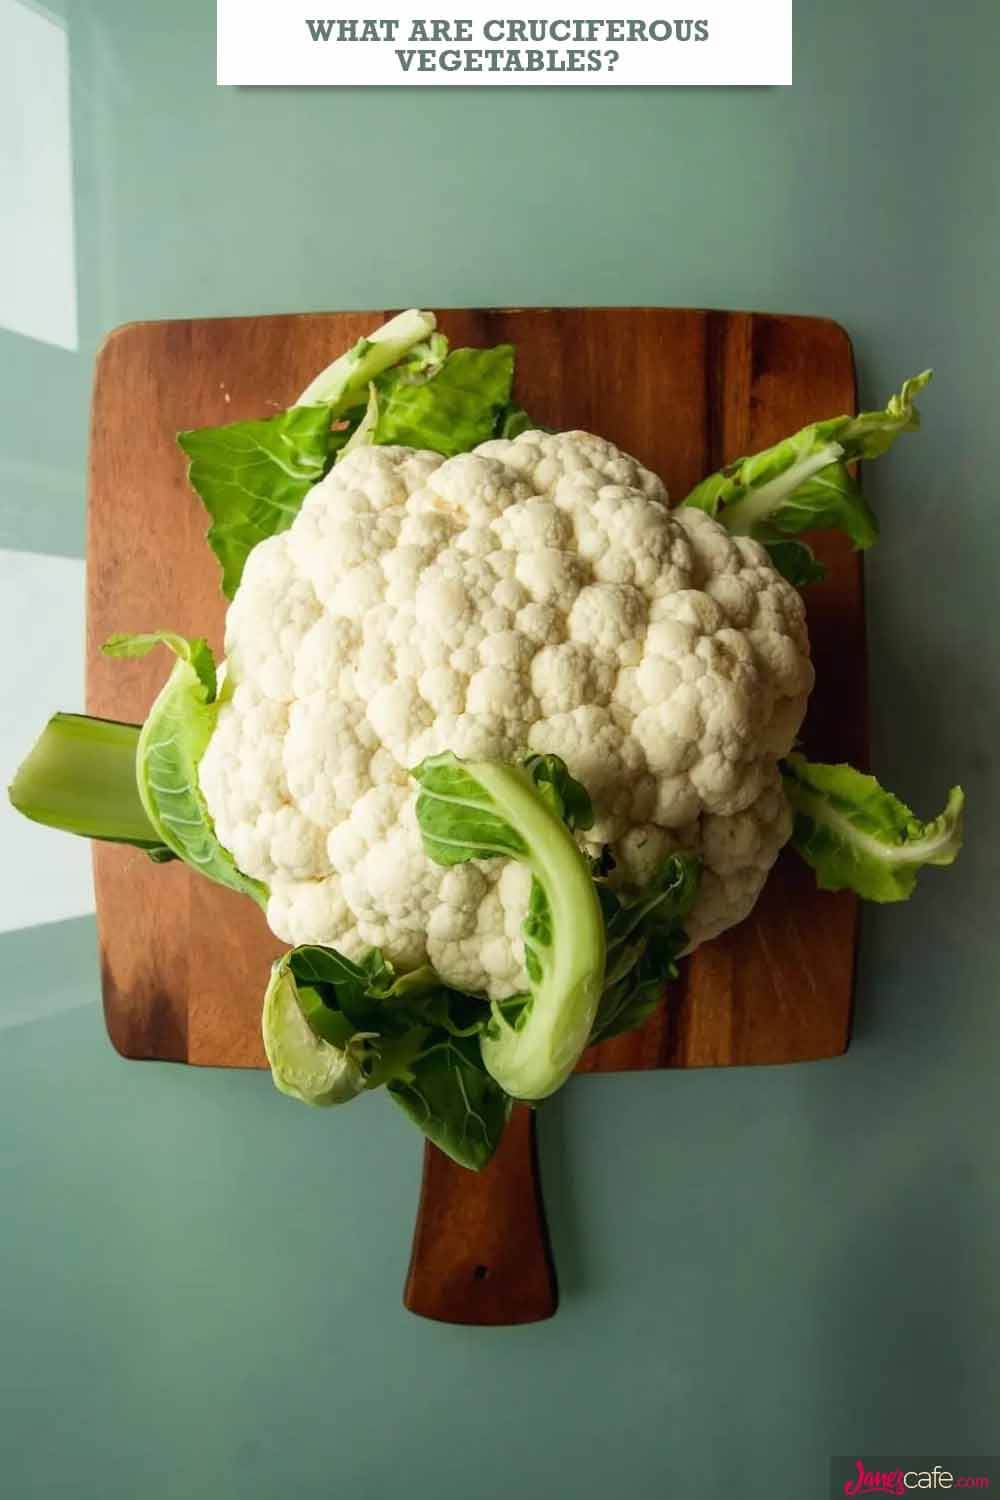 What Are Cruciferous Vegetables?